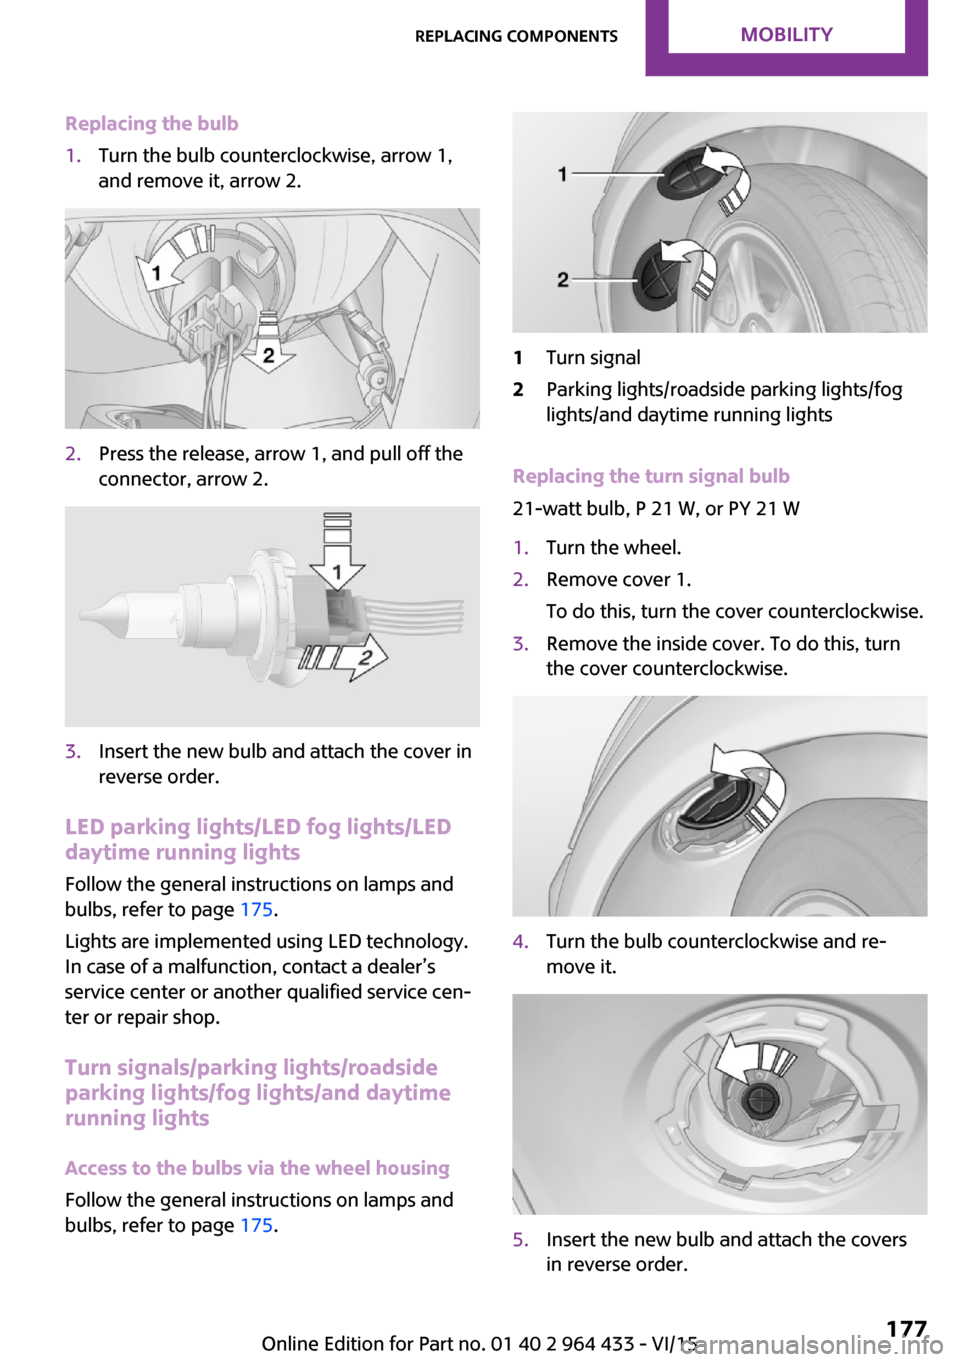 MINI Paceman 2016  Owners Manual Replacing the bulb1.Turn the bulb counterclockwise, arrow 1,
and remove it, arrow 2.2.Press the release, arrow 1, and pull off the
connector, arrow 2.3.Insert the new bulb and attach the cover in
reve